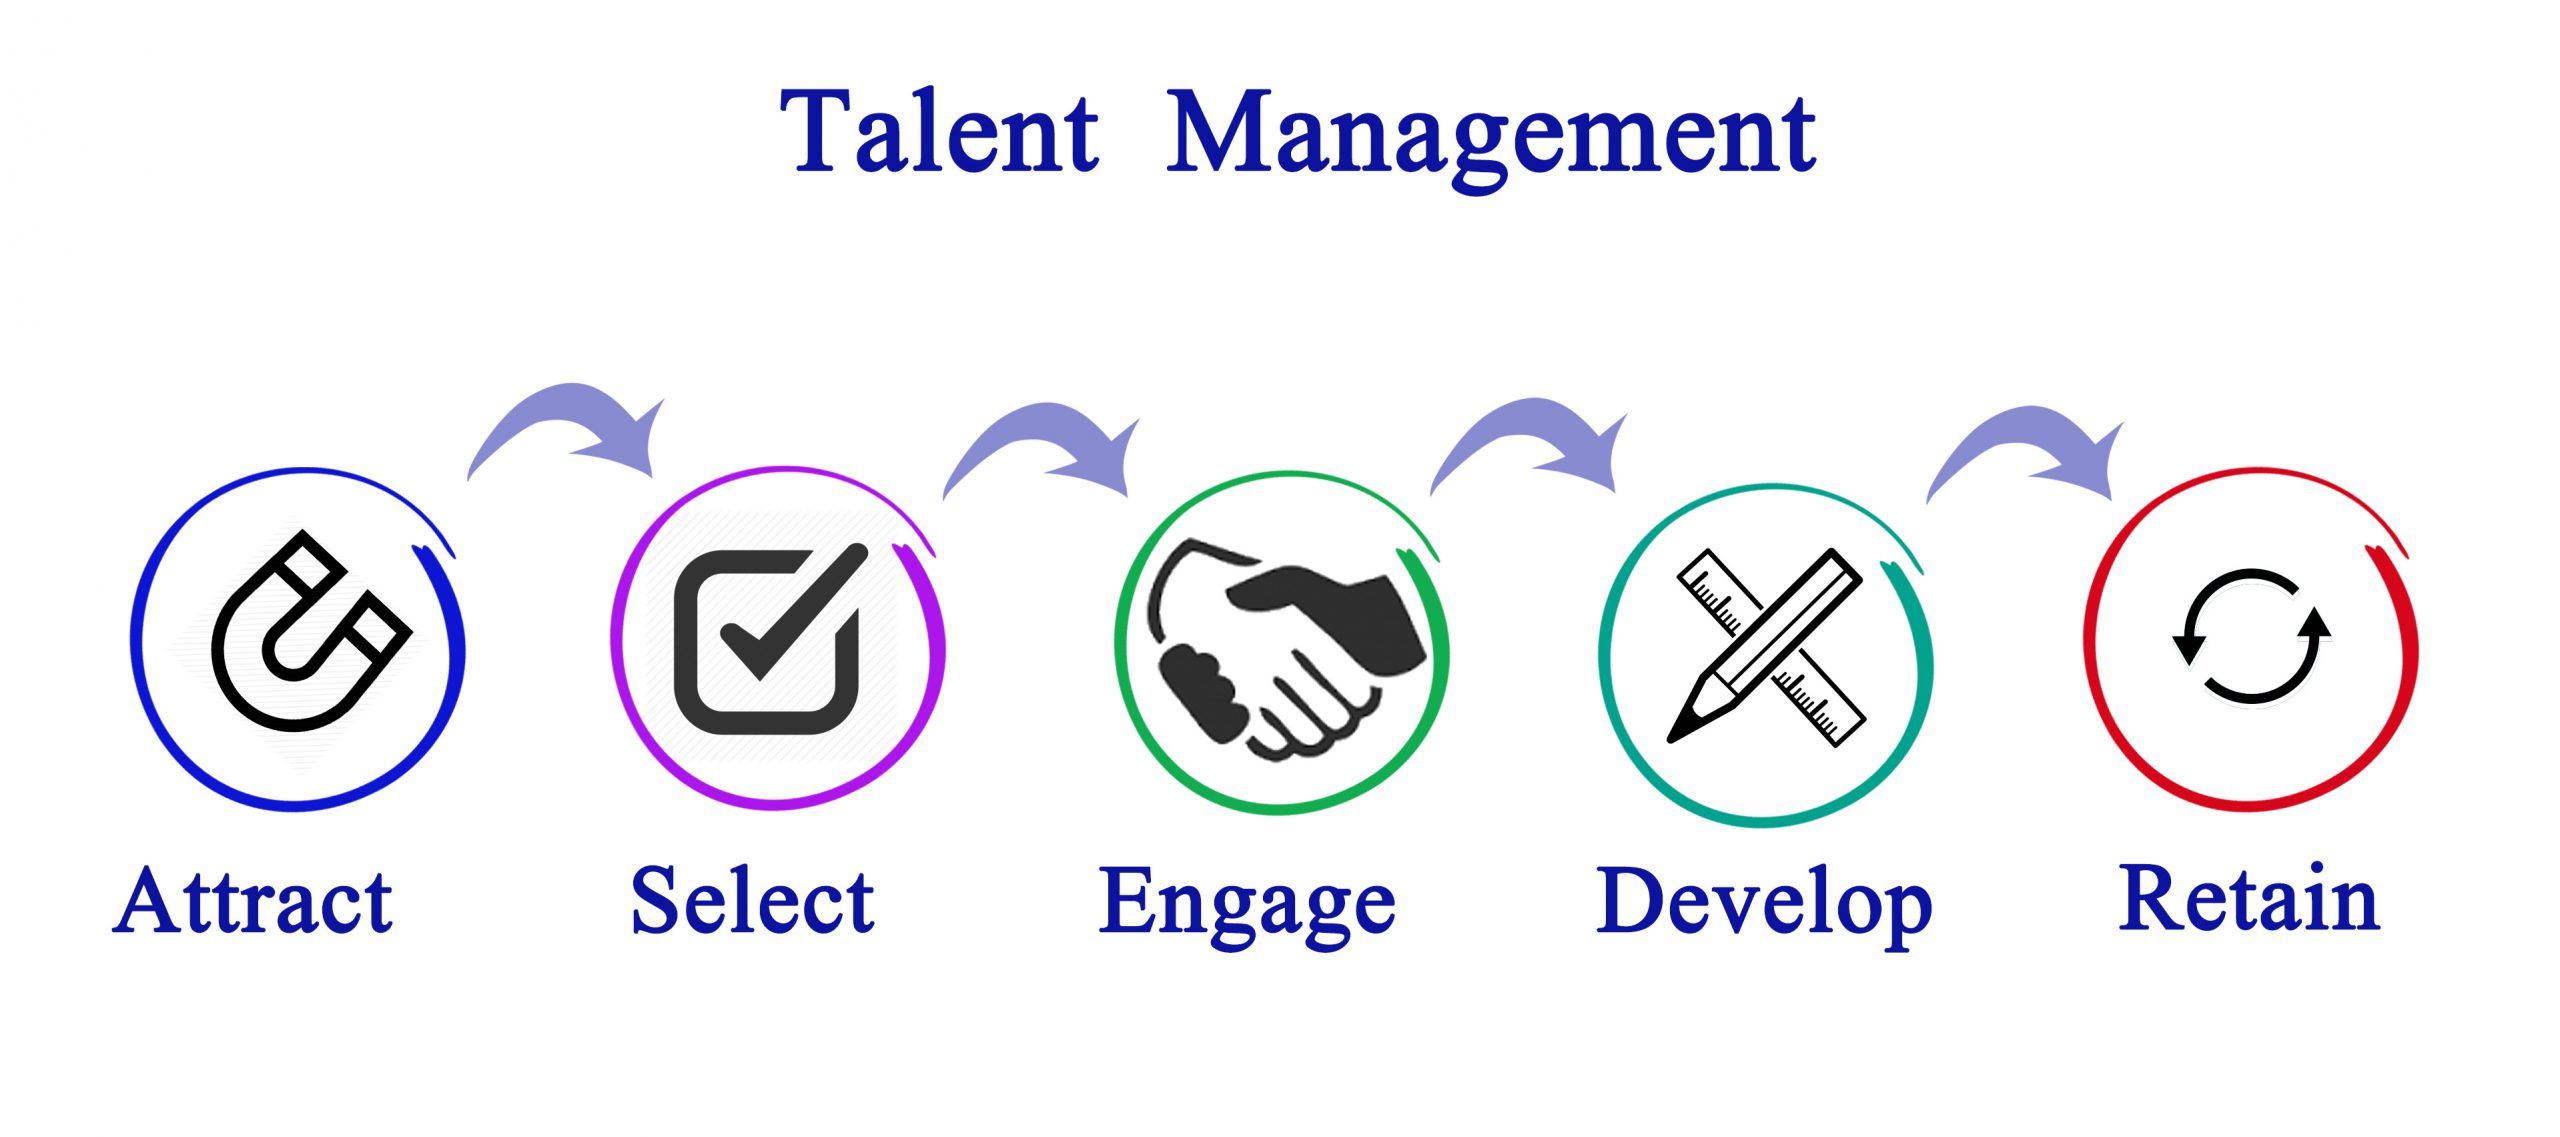 Use a Talent Management System to Develop Teams That Give Results